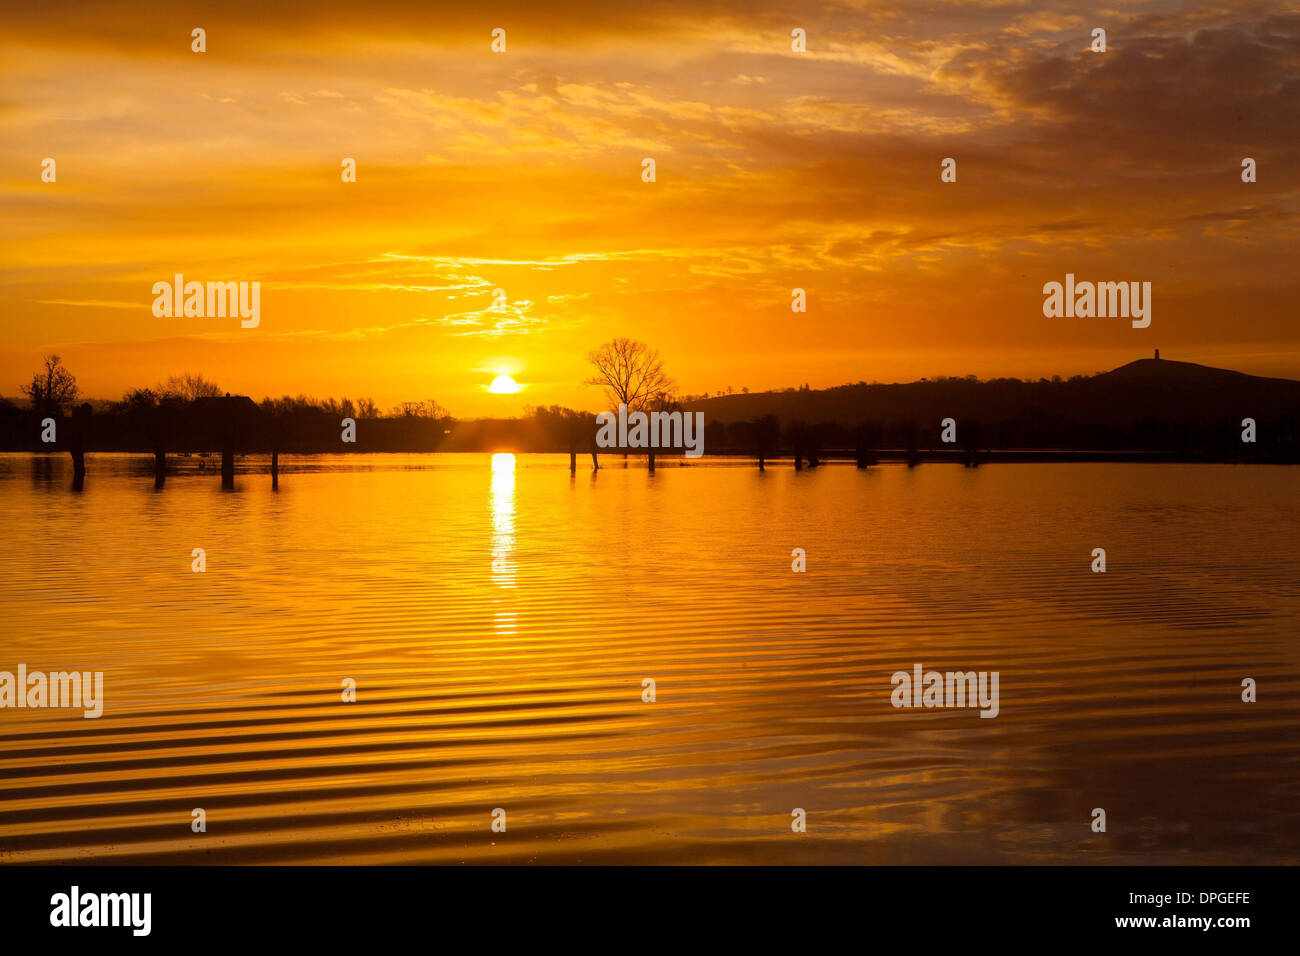 Glastonbury Tor can be seen during a stunning sunrise over flooded fields Stock Photo